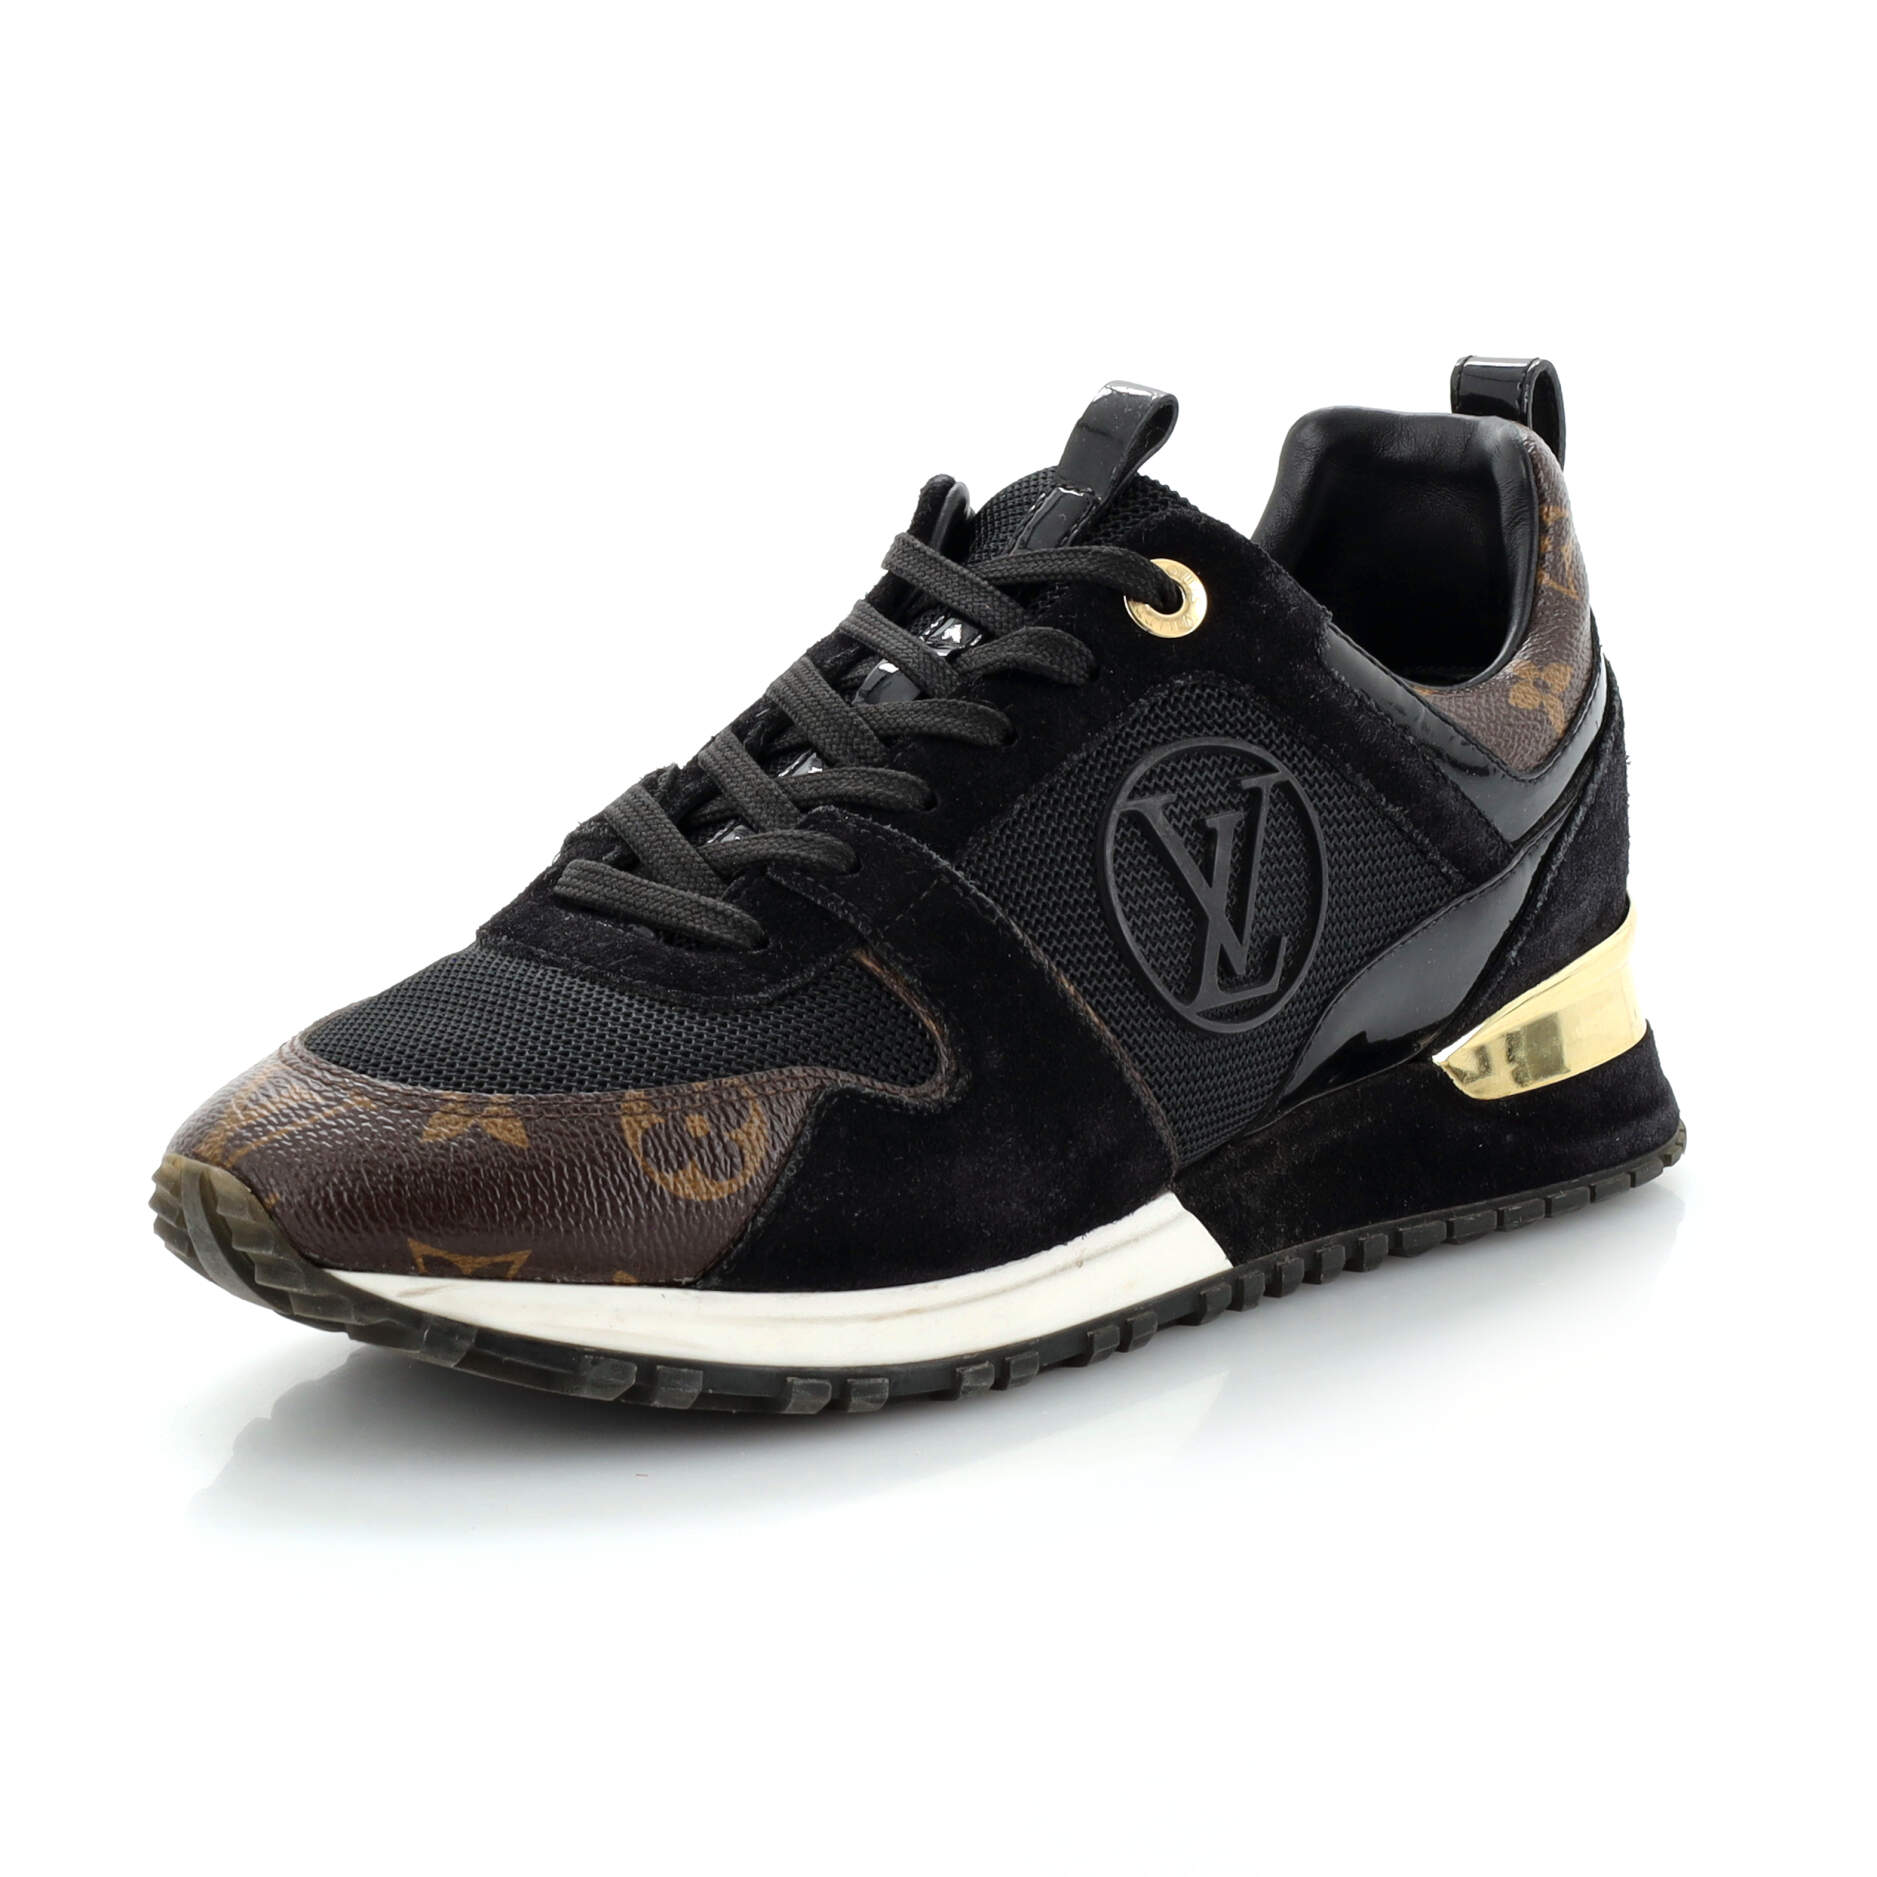 Women's Run Away Sneakers Mesh with Monogram Canvas and Suede